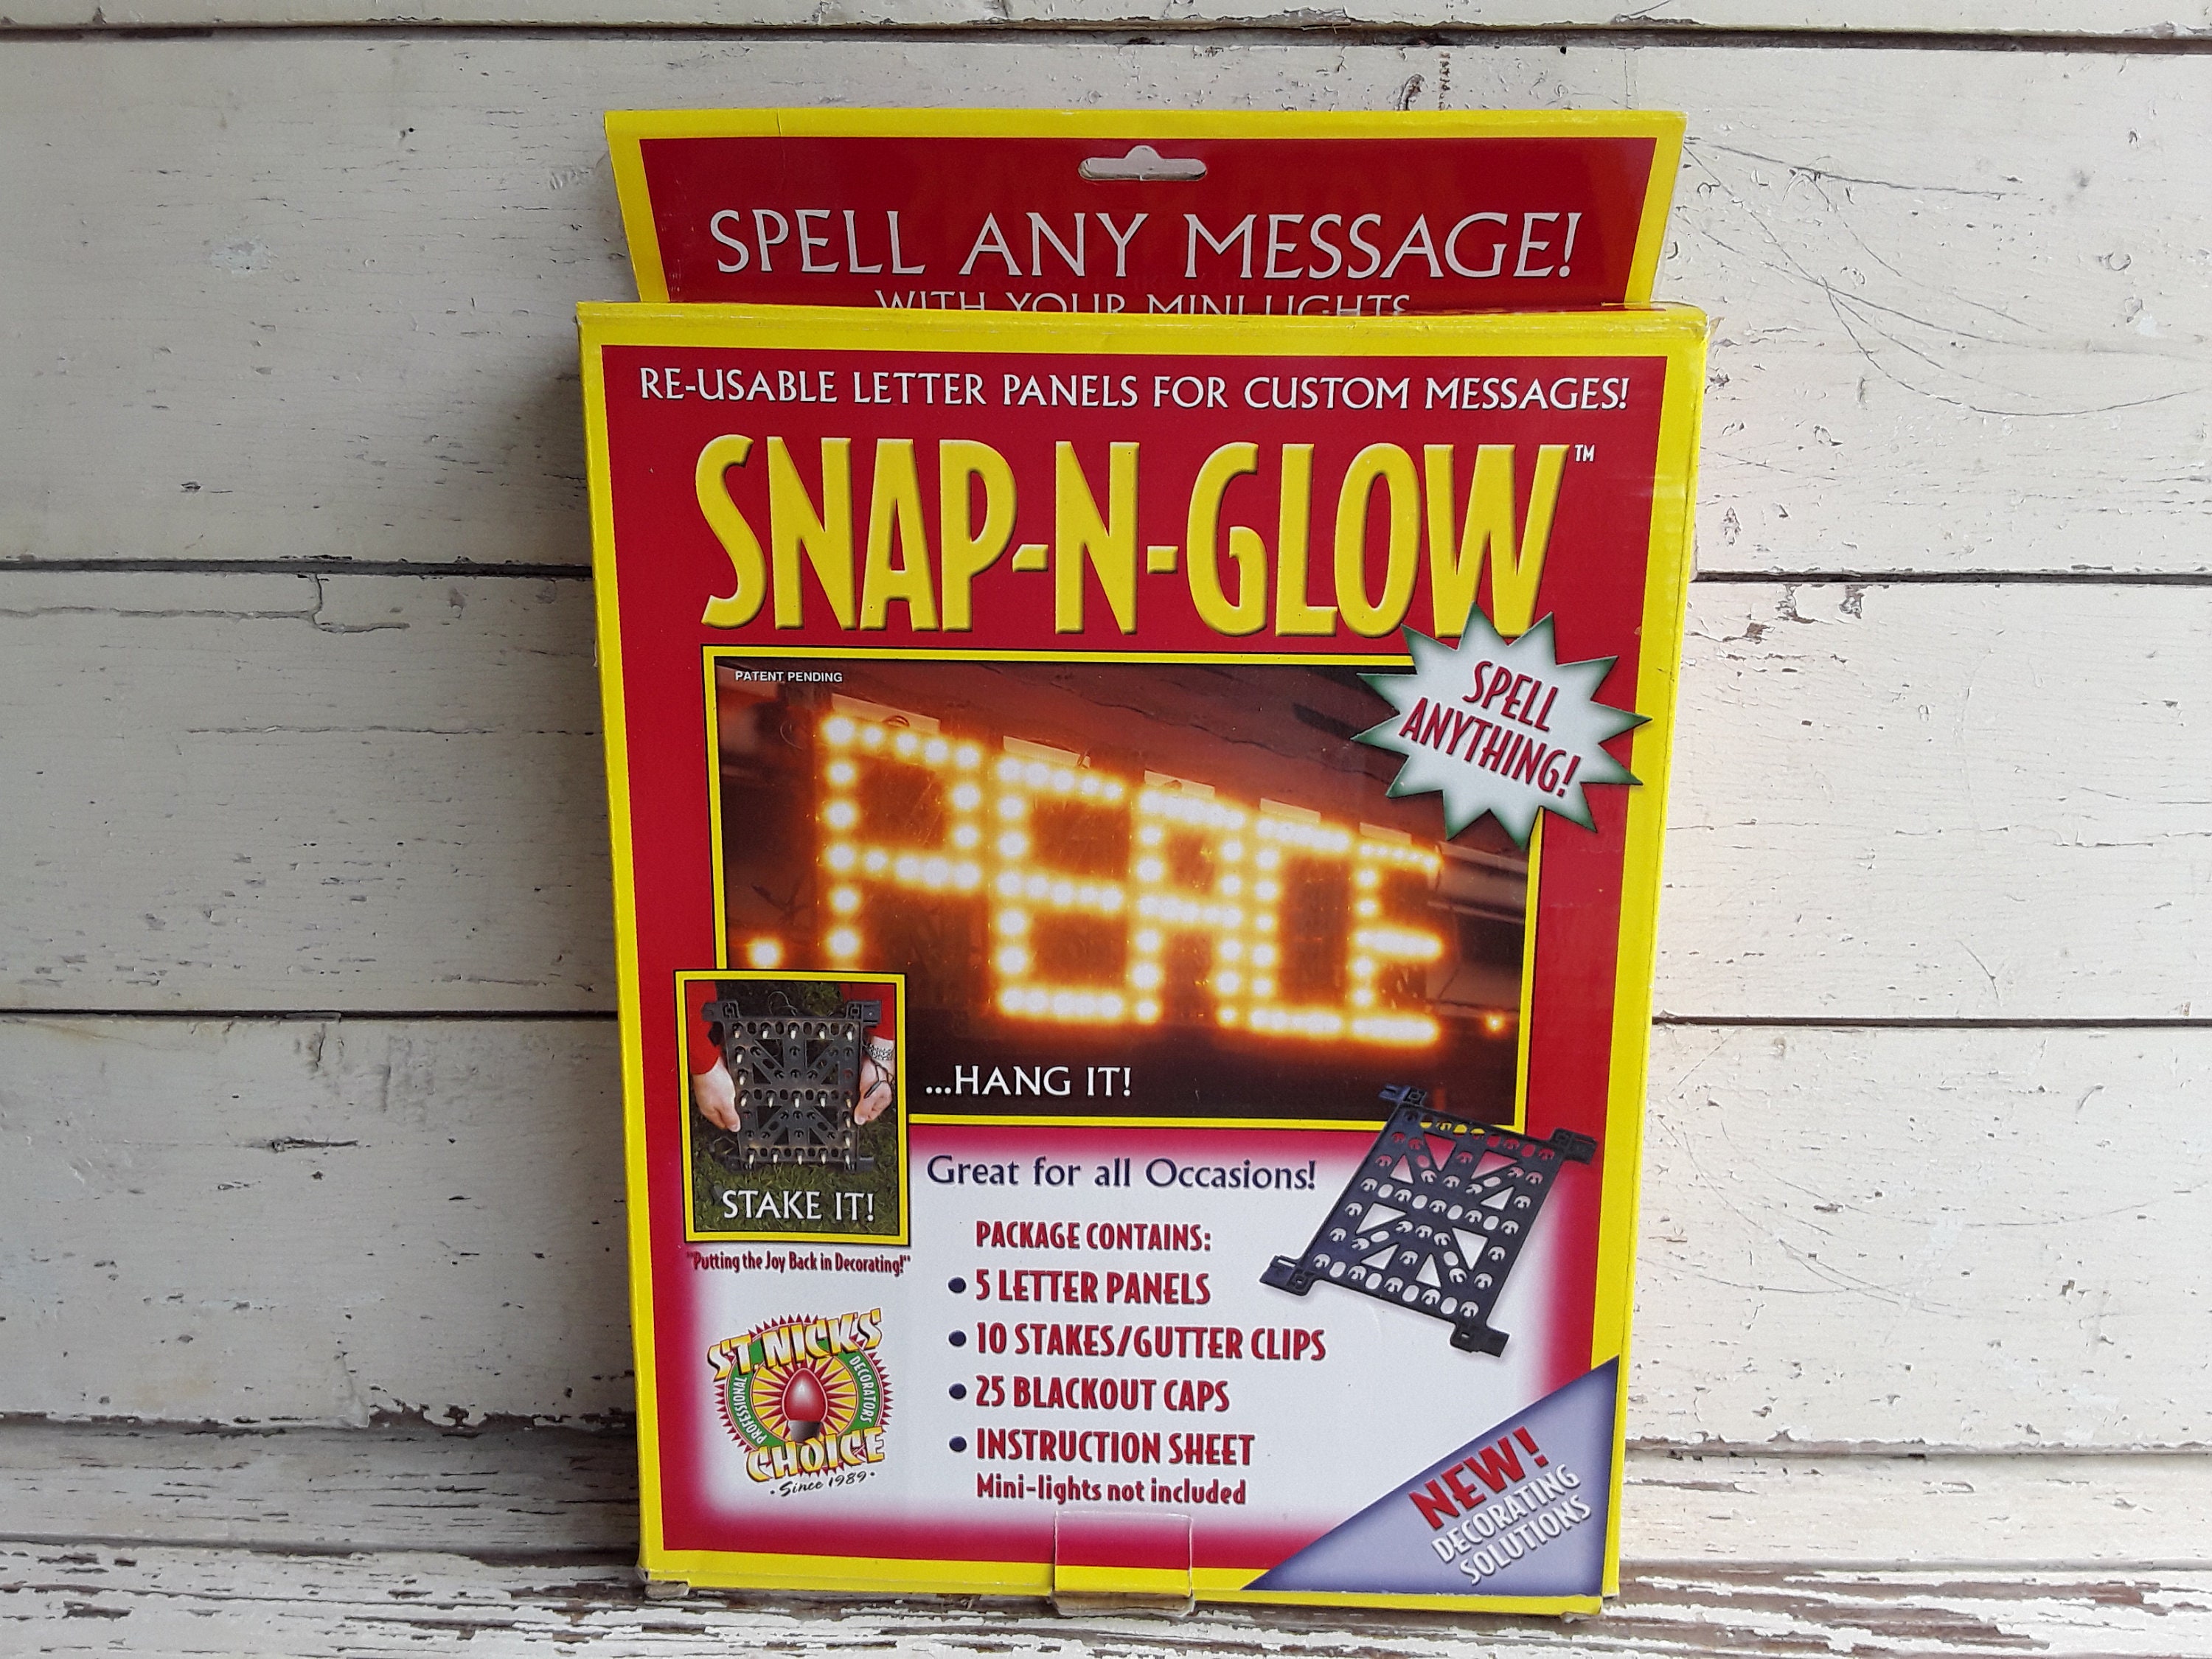 Snap-n-glow Re-usable Letter Panels for Custom Messages 